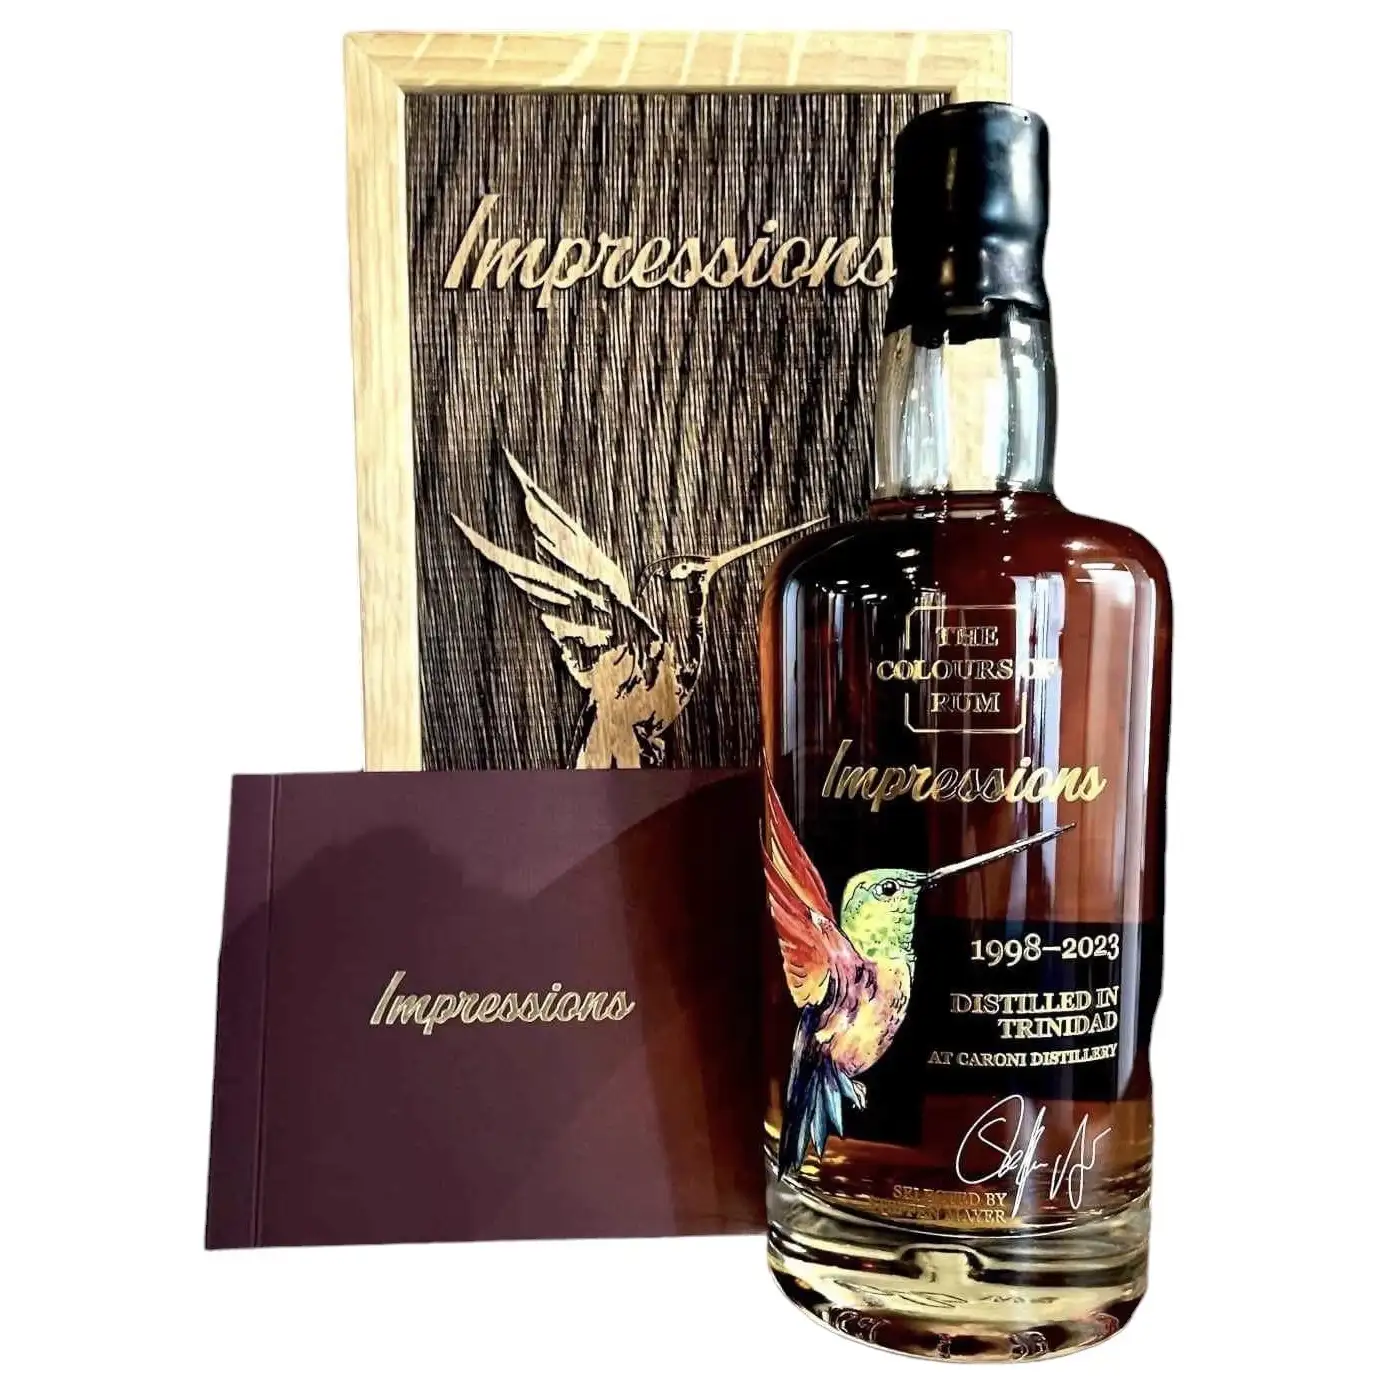 Image of the front of the bottle of the rum Impressions (Selected by Steffen Mayer)